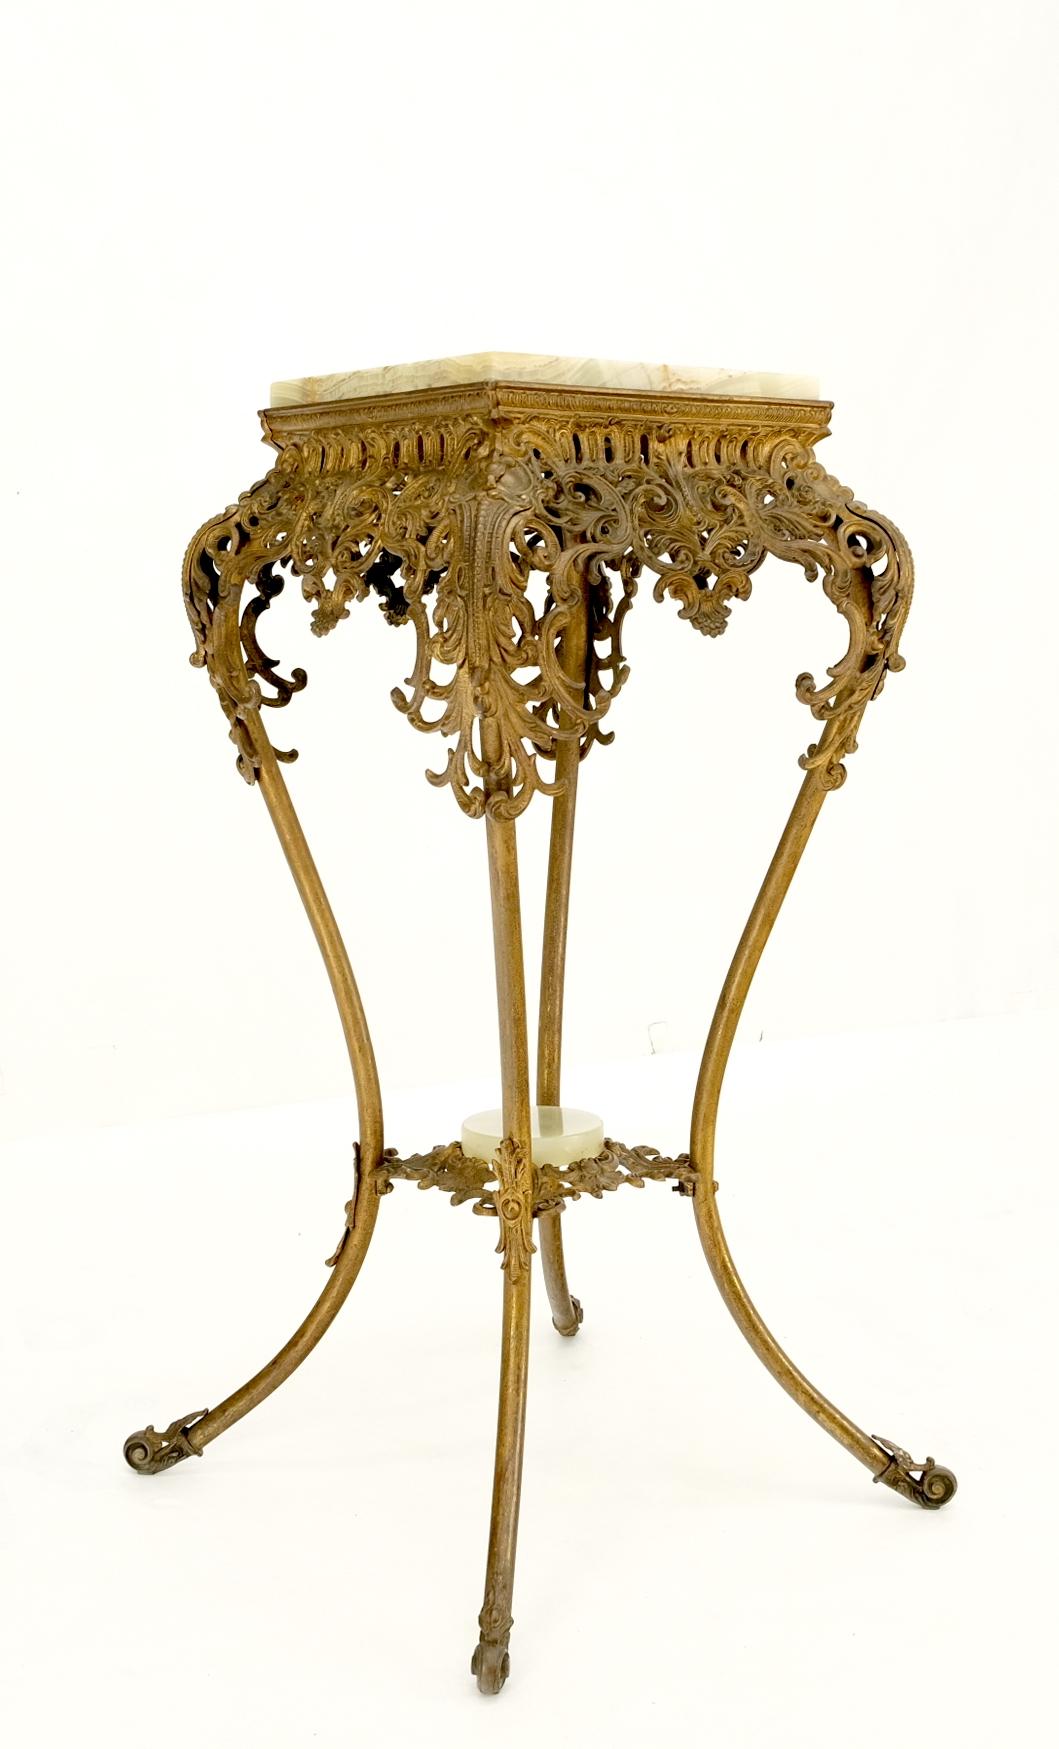 Onyx Top Ornate Gilt Brass Base Lamp Table Stand Pedestal  For Sale 8